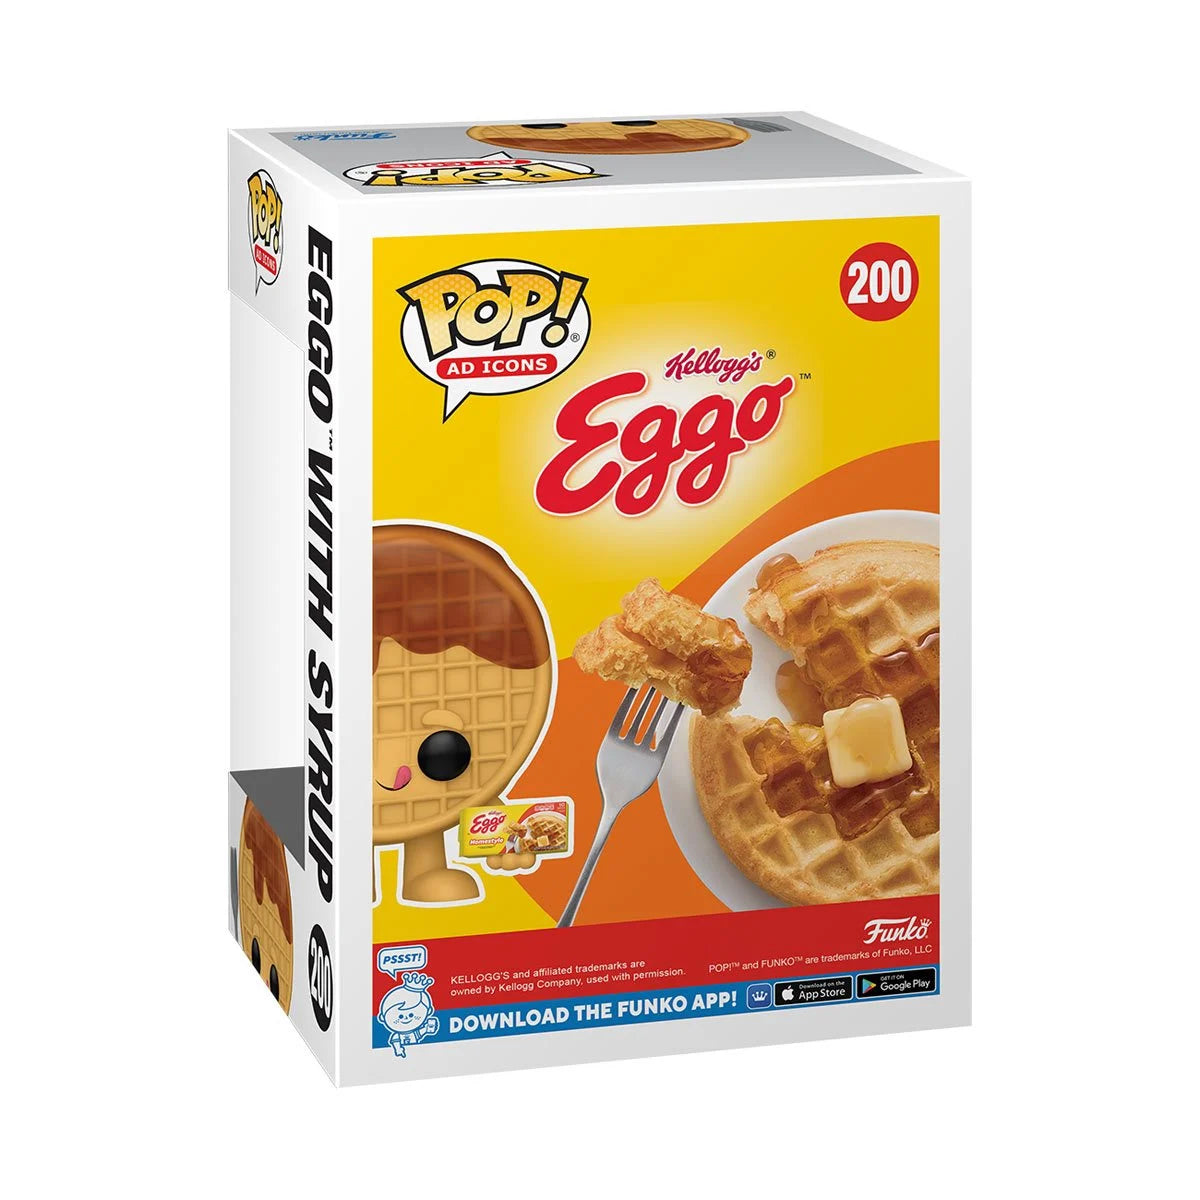 Kellogg's Eggo Waffle with Syrup Scented Pop!